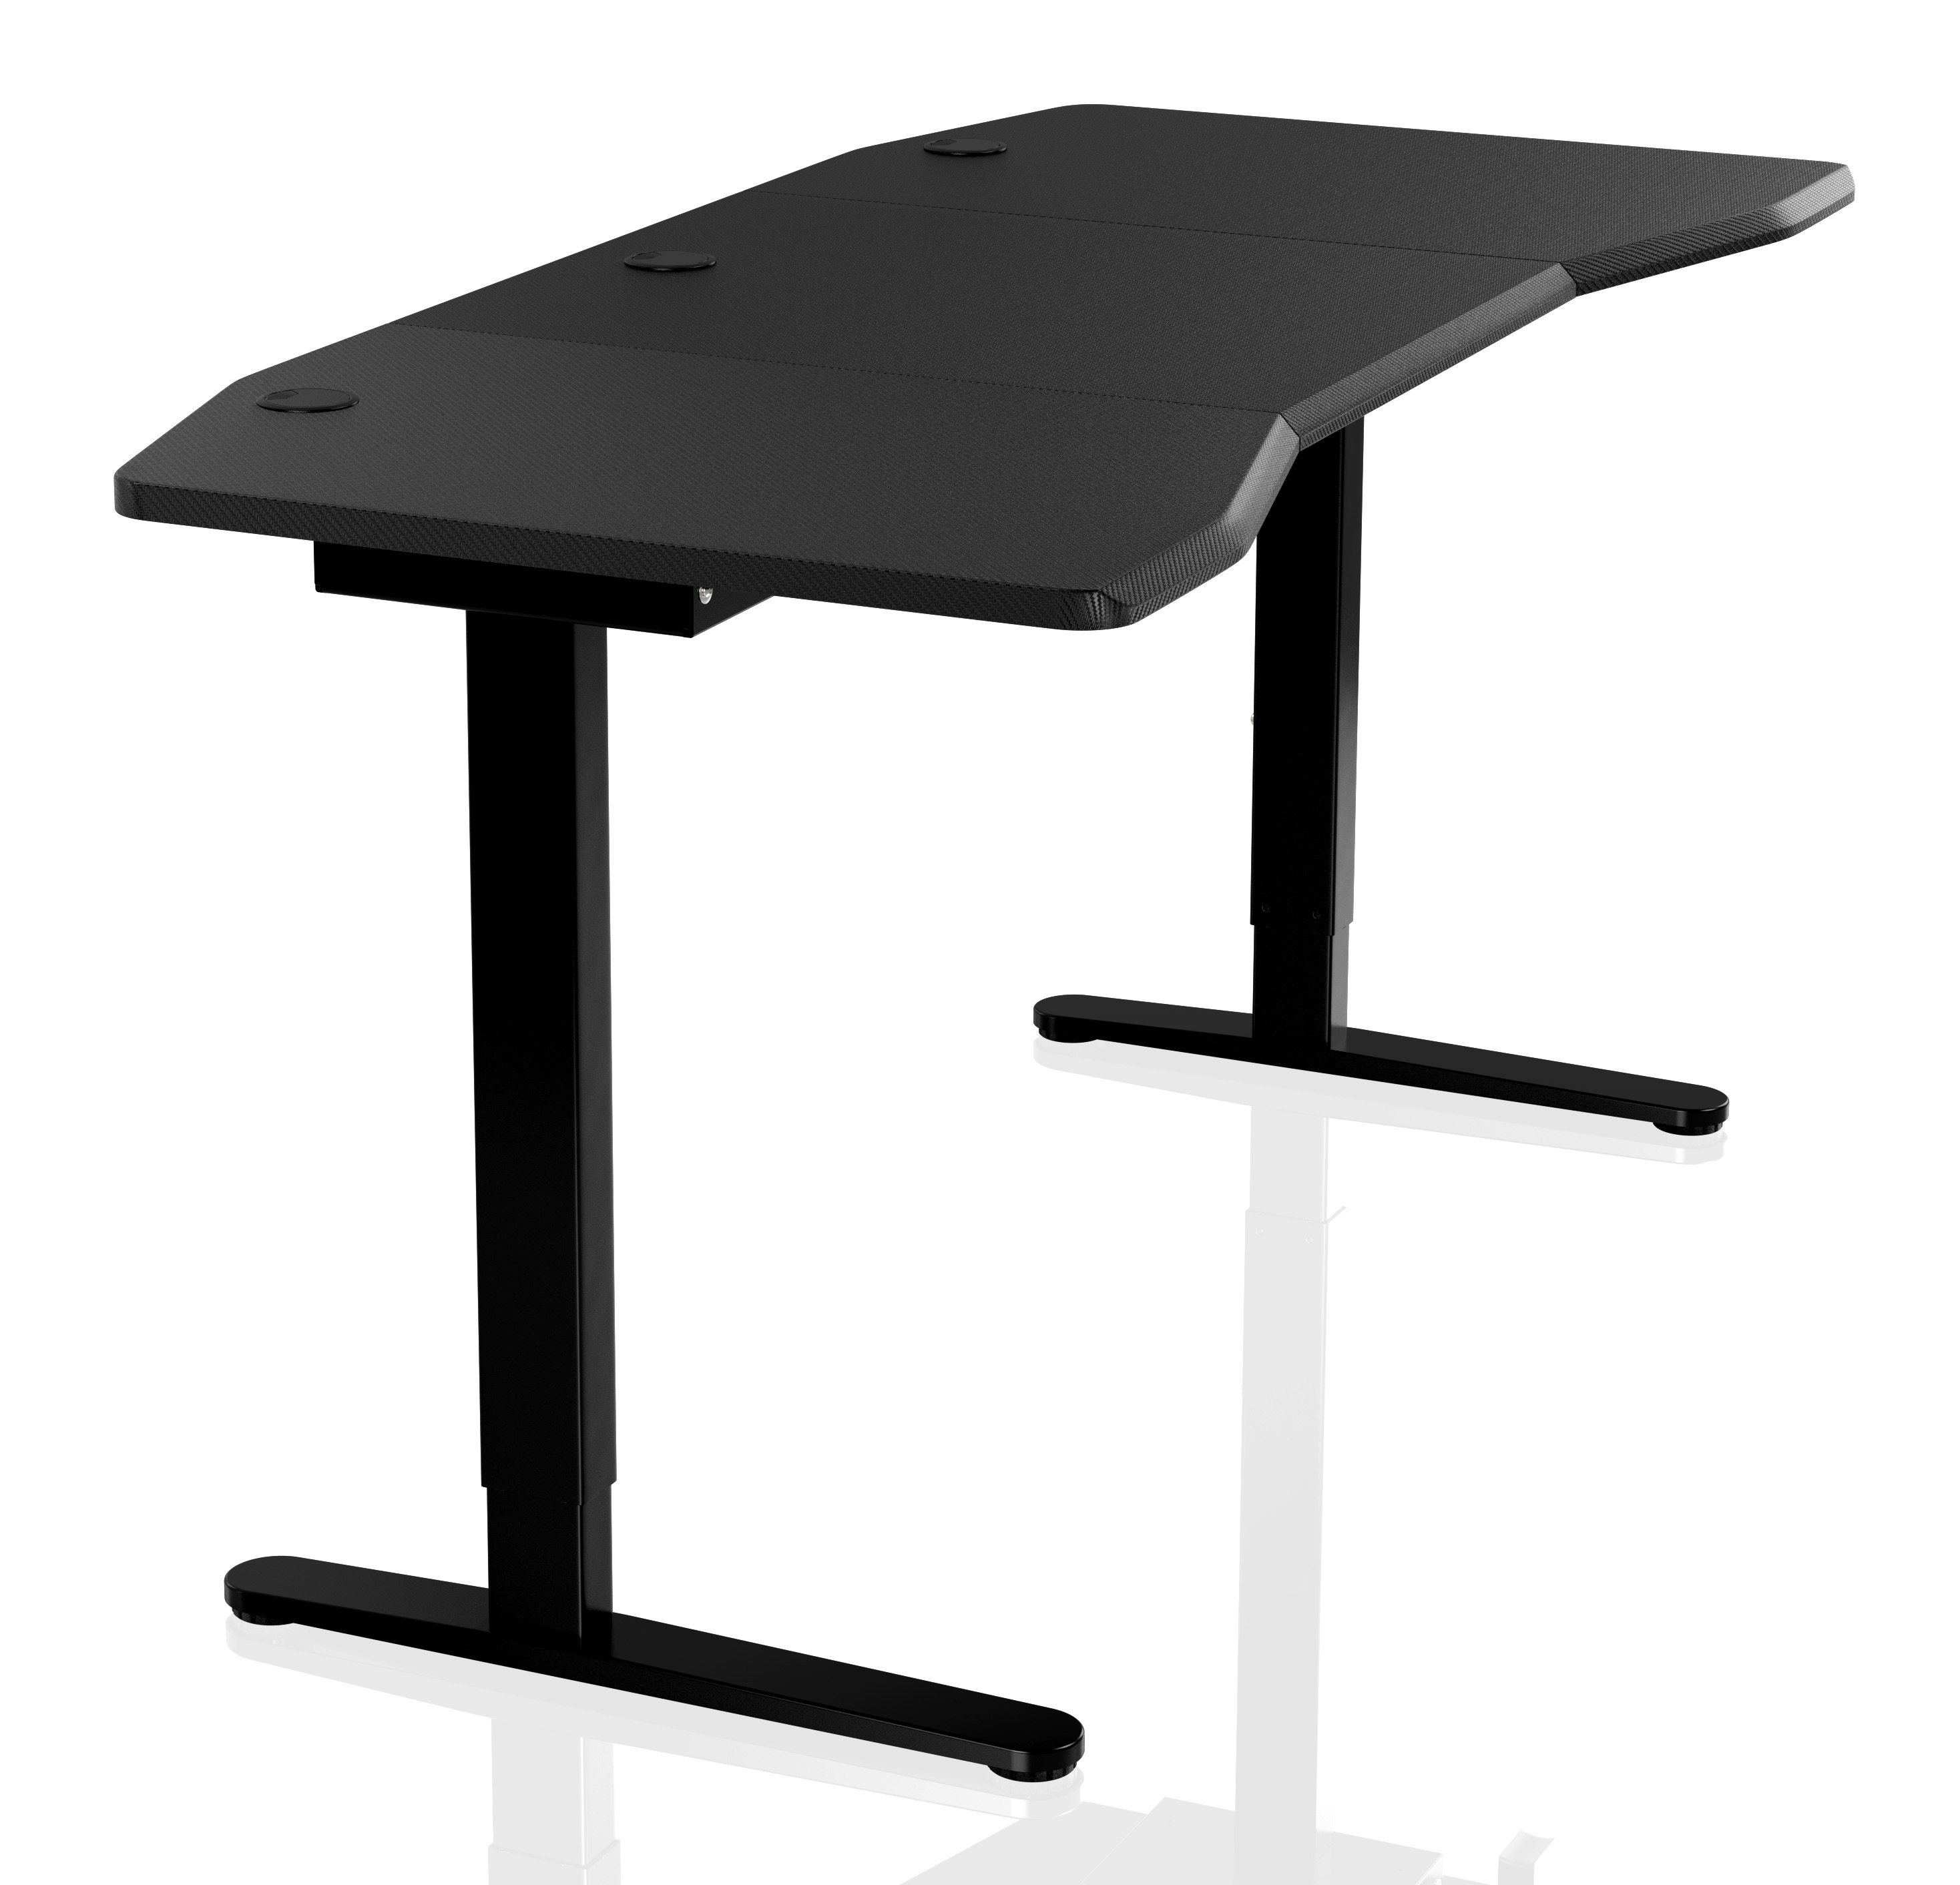 Nitro Concepts - Nitro Concepts D16M Height Adjustable Gaming Desk - Carbon Red